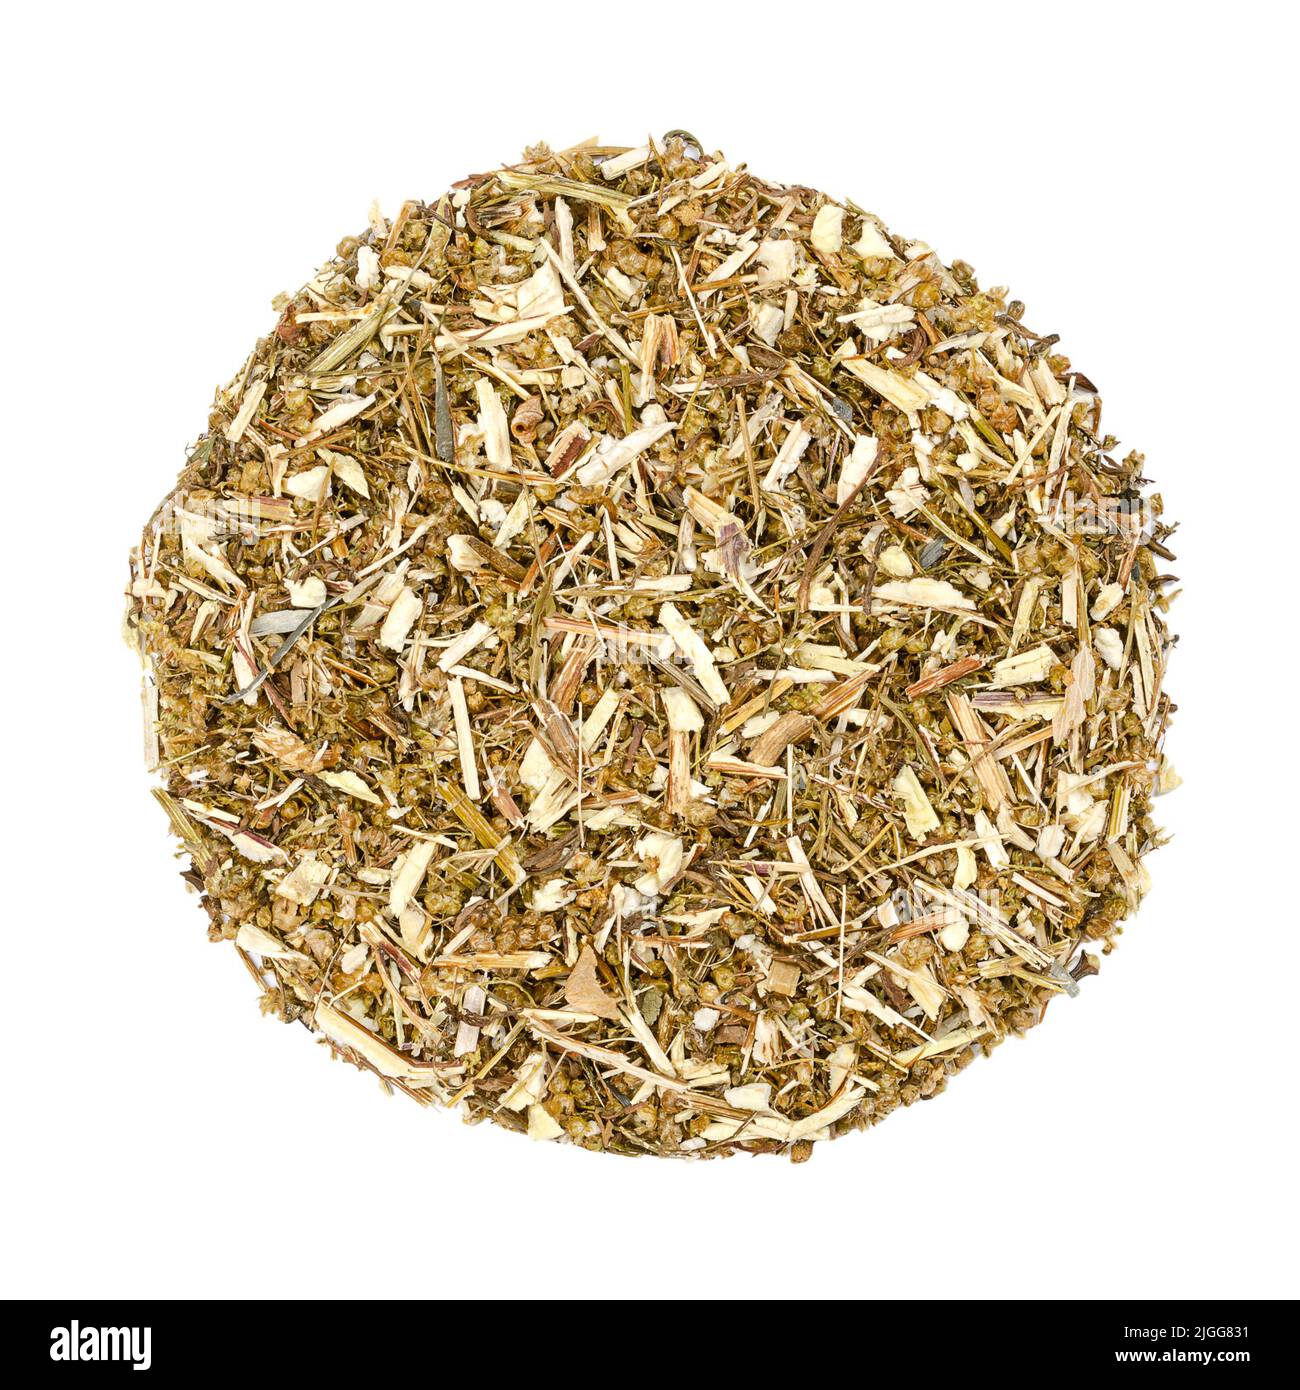 Dried sweet wormwood, Artemisia annua, herb circle from above. The discovery of plant extract artemisinin is a Nobel prize awarded medication. Stock Photo